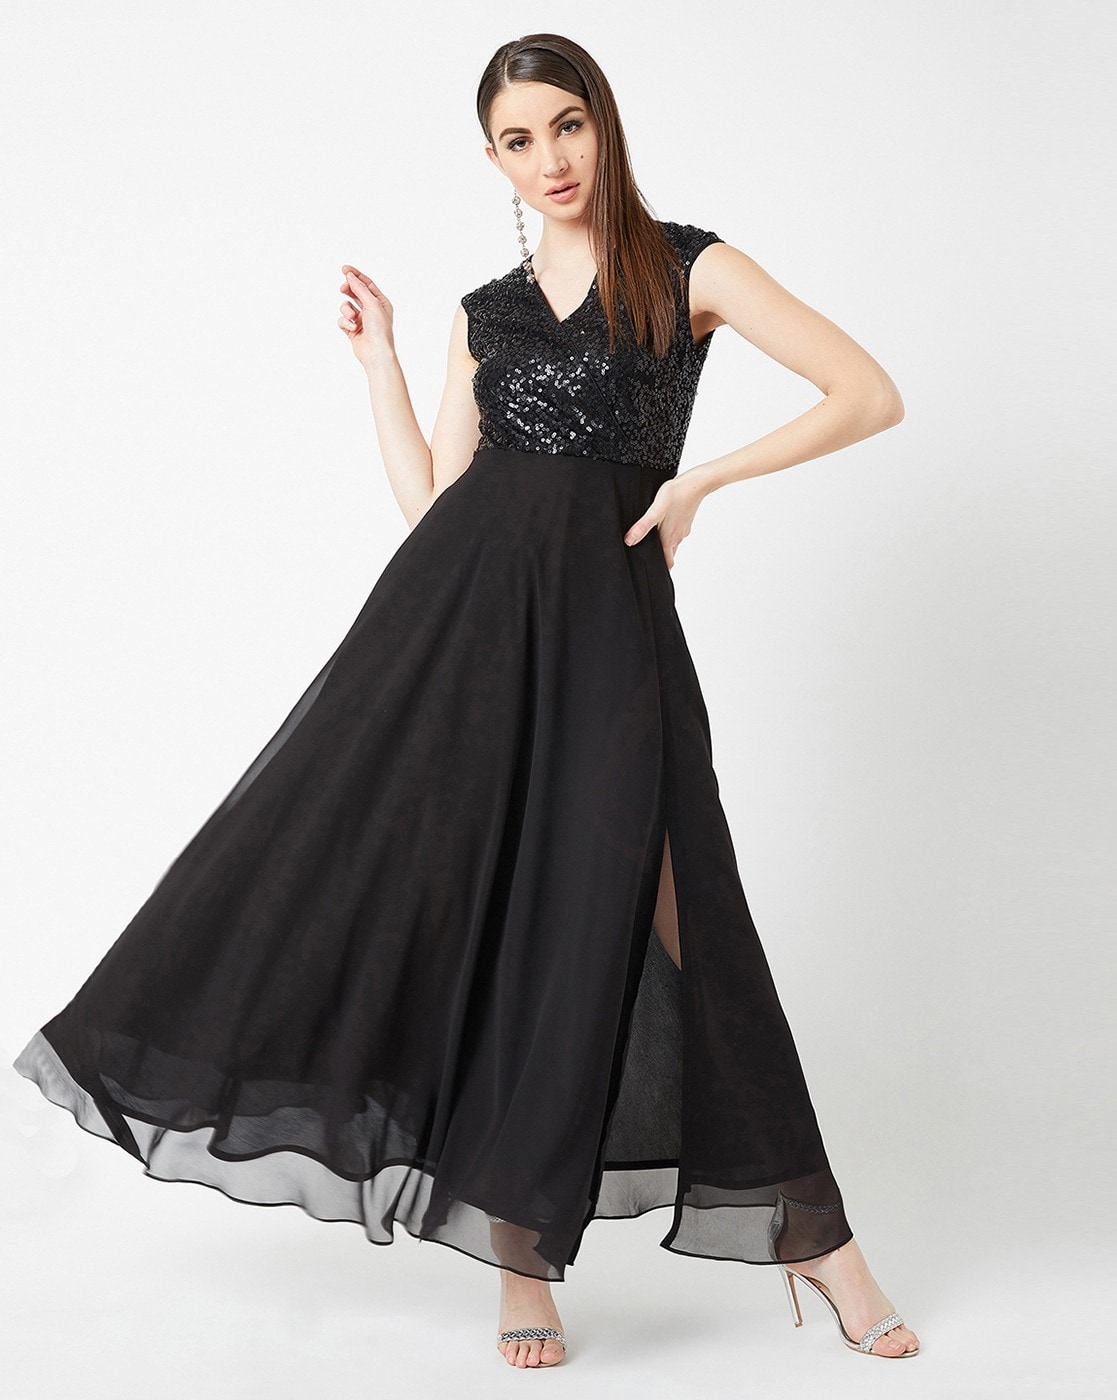 Ombre Black to Red Two-Tone Ball Gown Quinceanera Dress - Xdressy